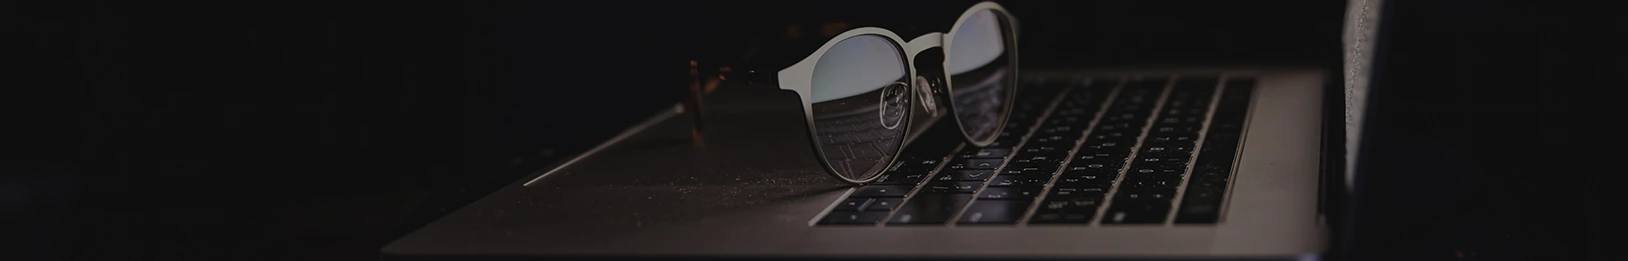 Pair of glasses resting on the keyboard of a laptop